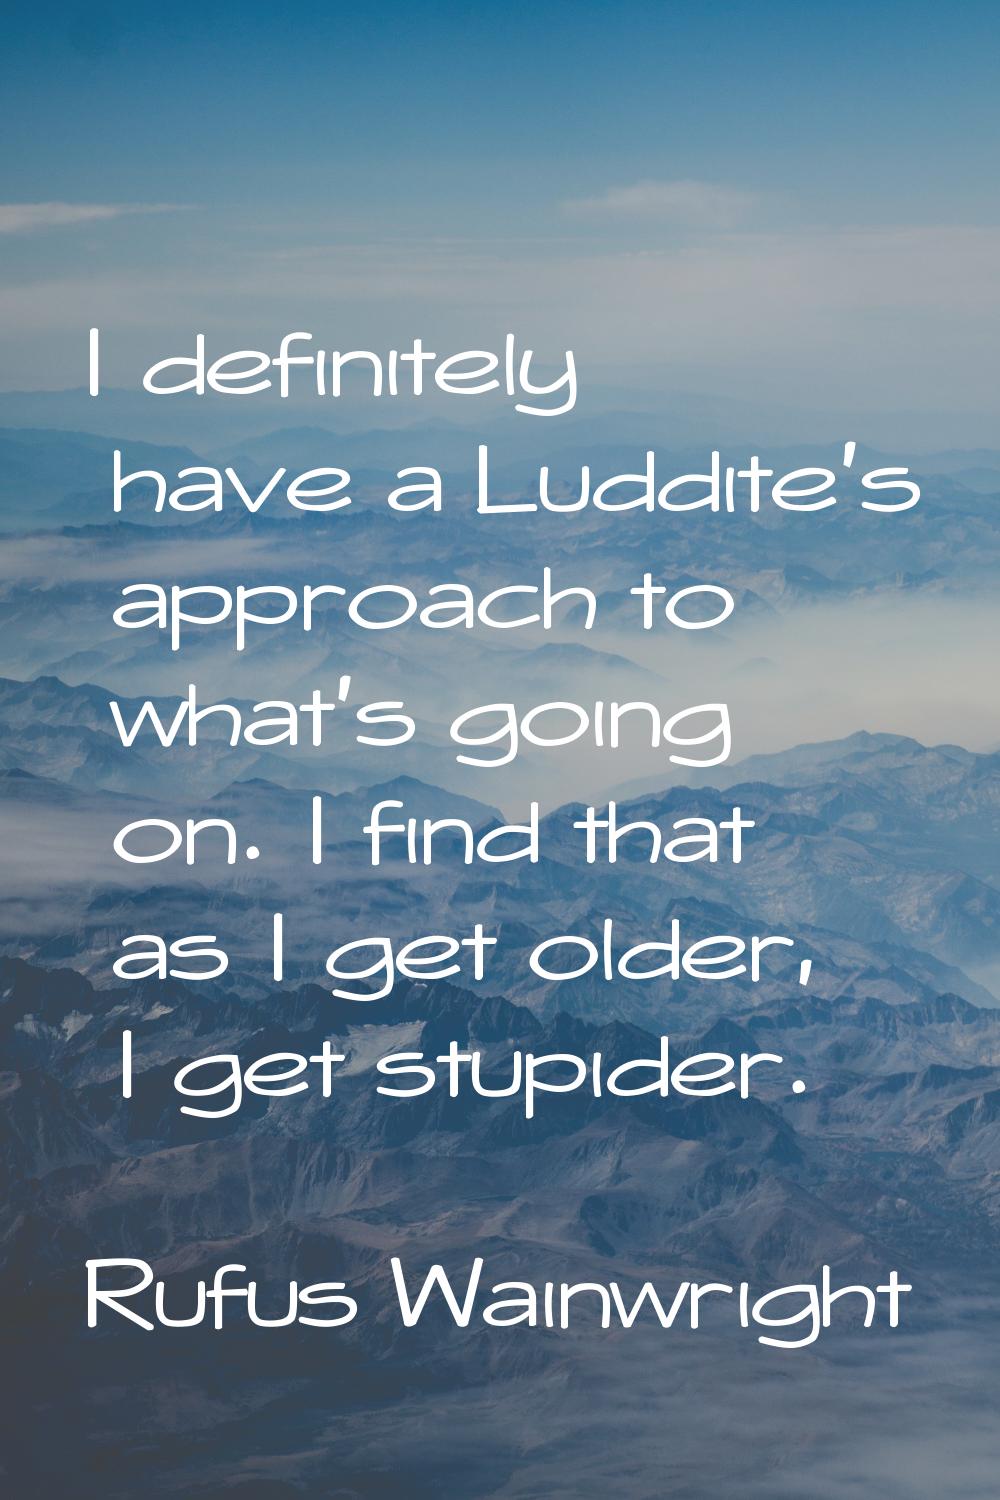 I definitely have a Luddite's approach to what's going on. I find that as I get older, I get stupid